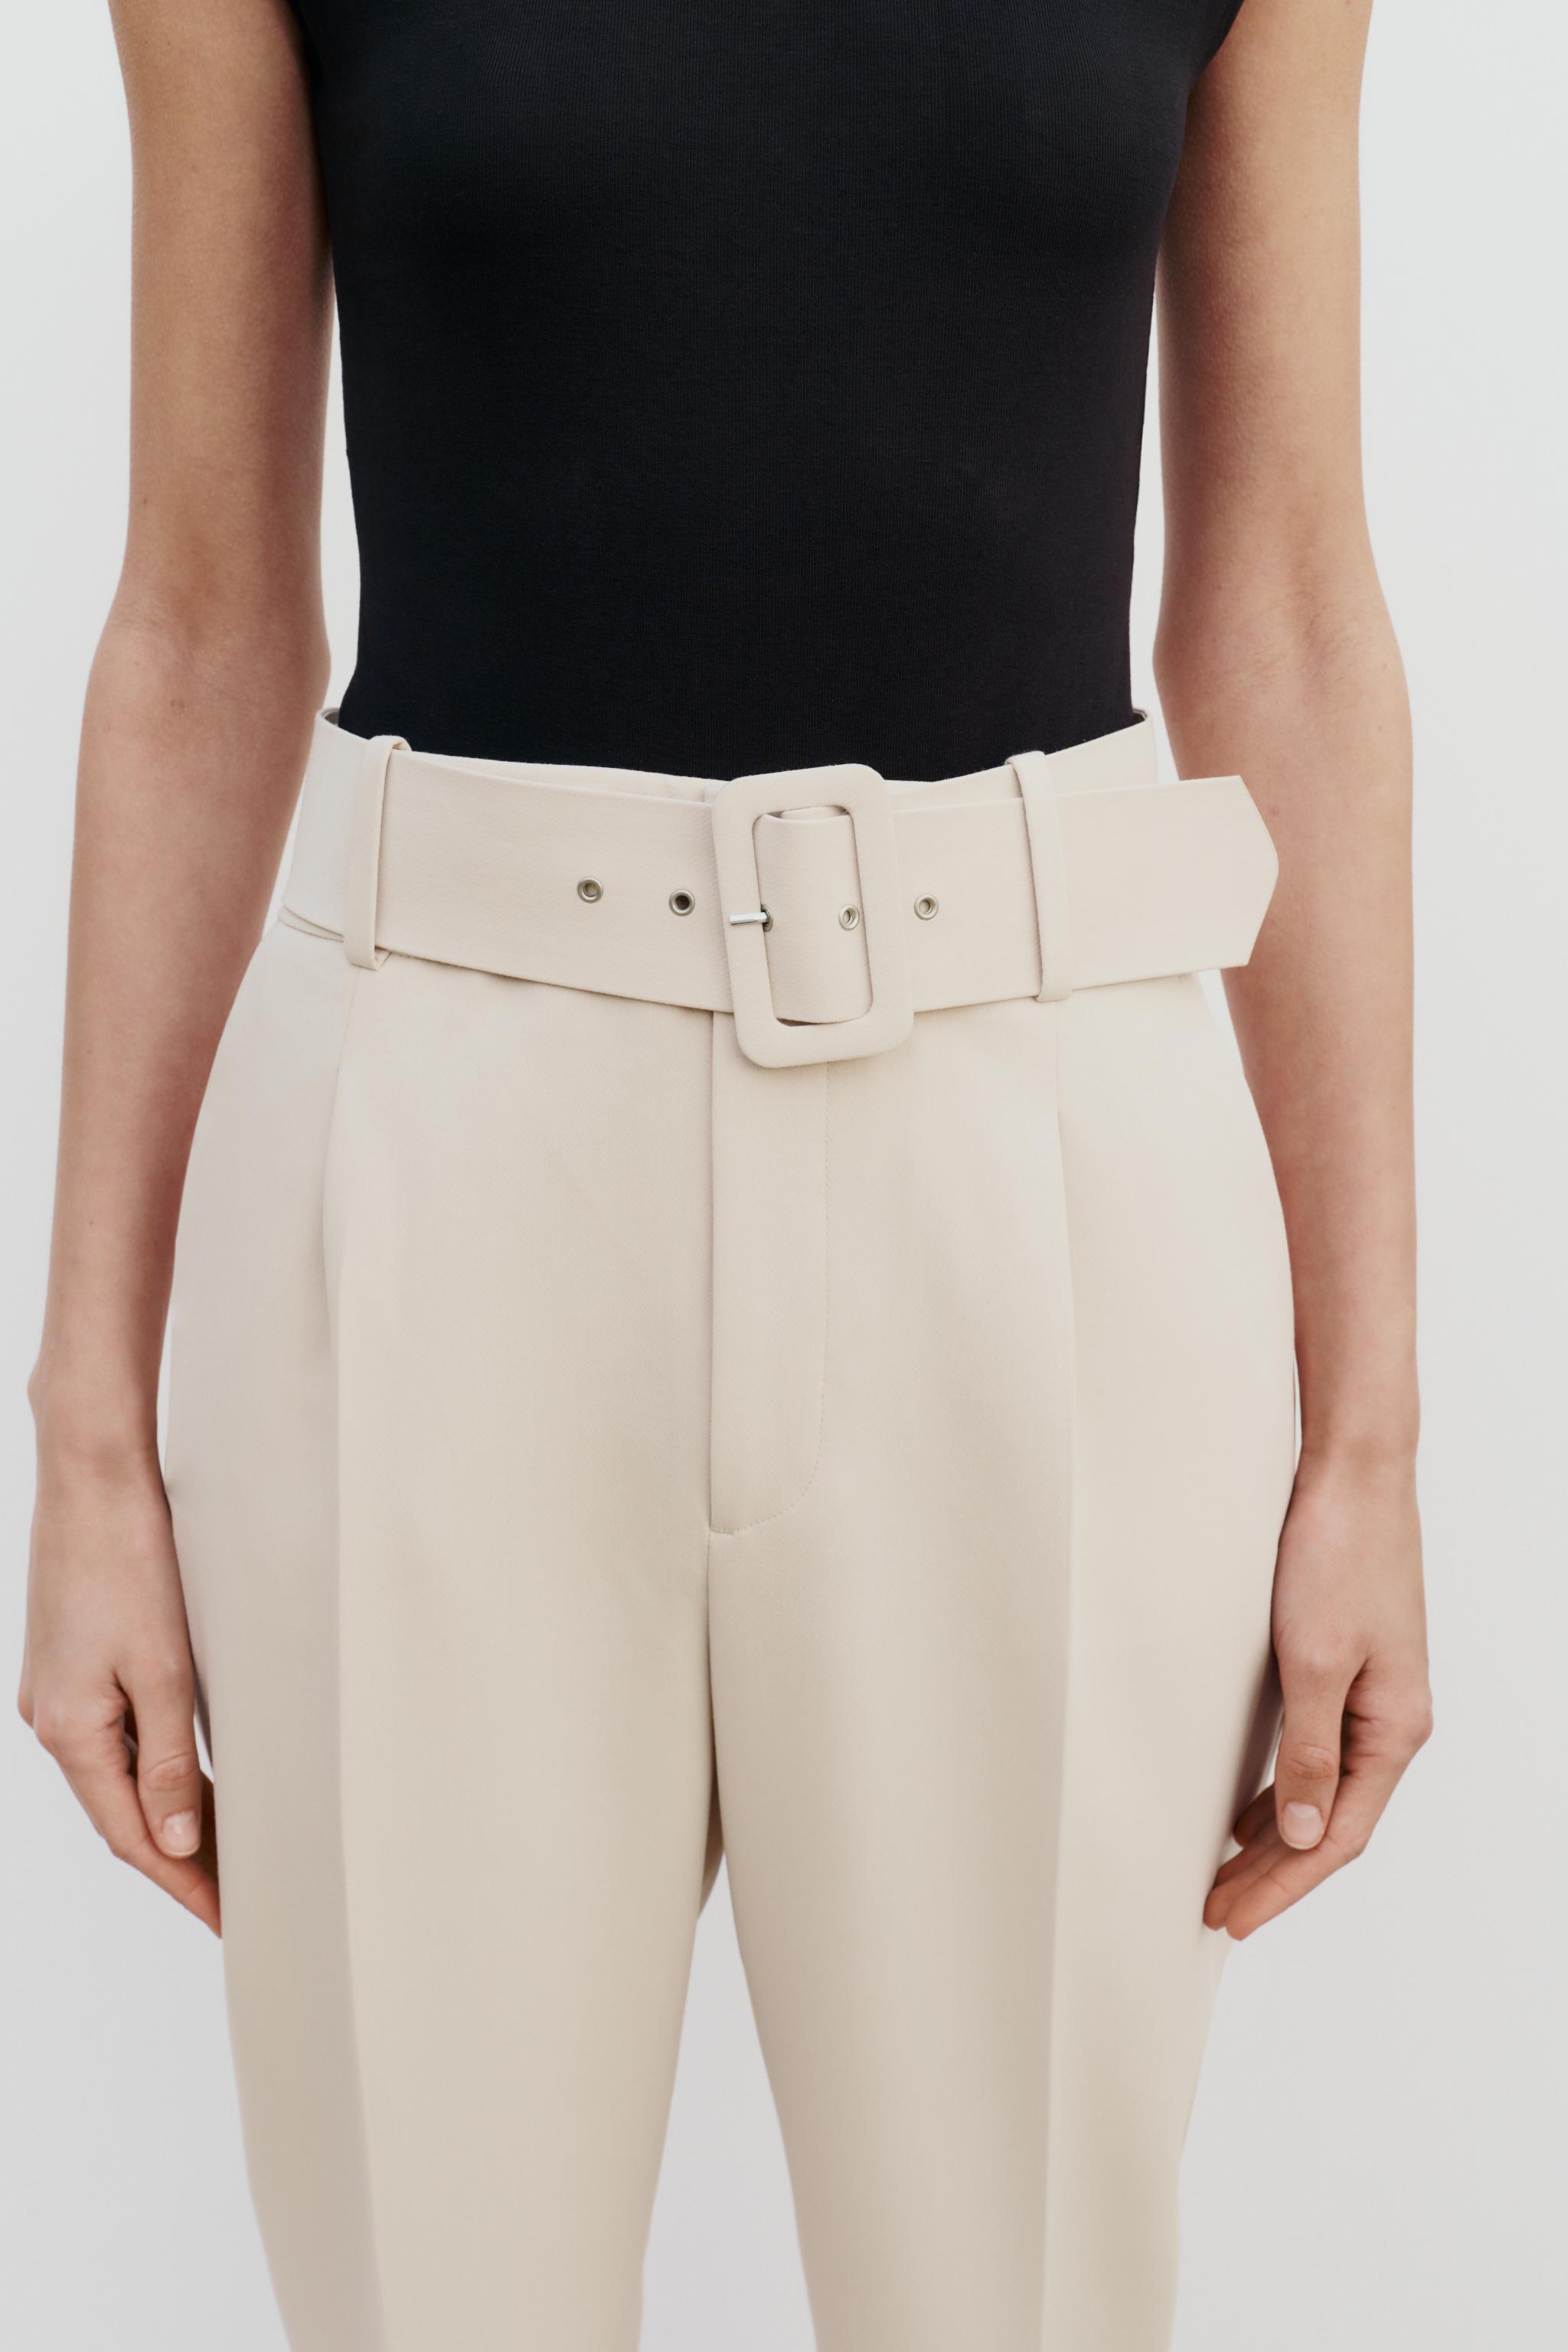 Zara Trousers with Lined Belt